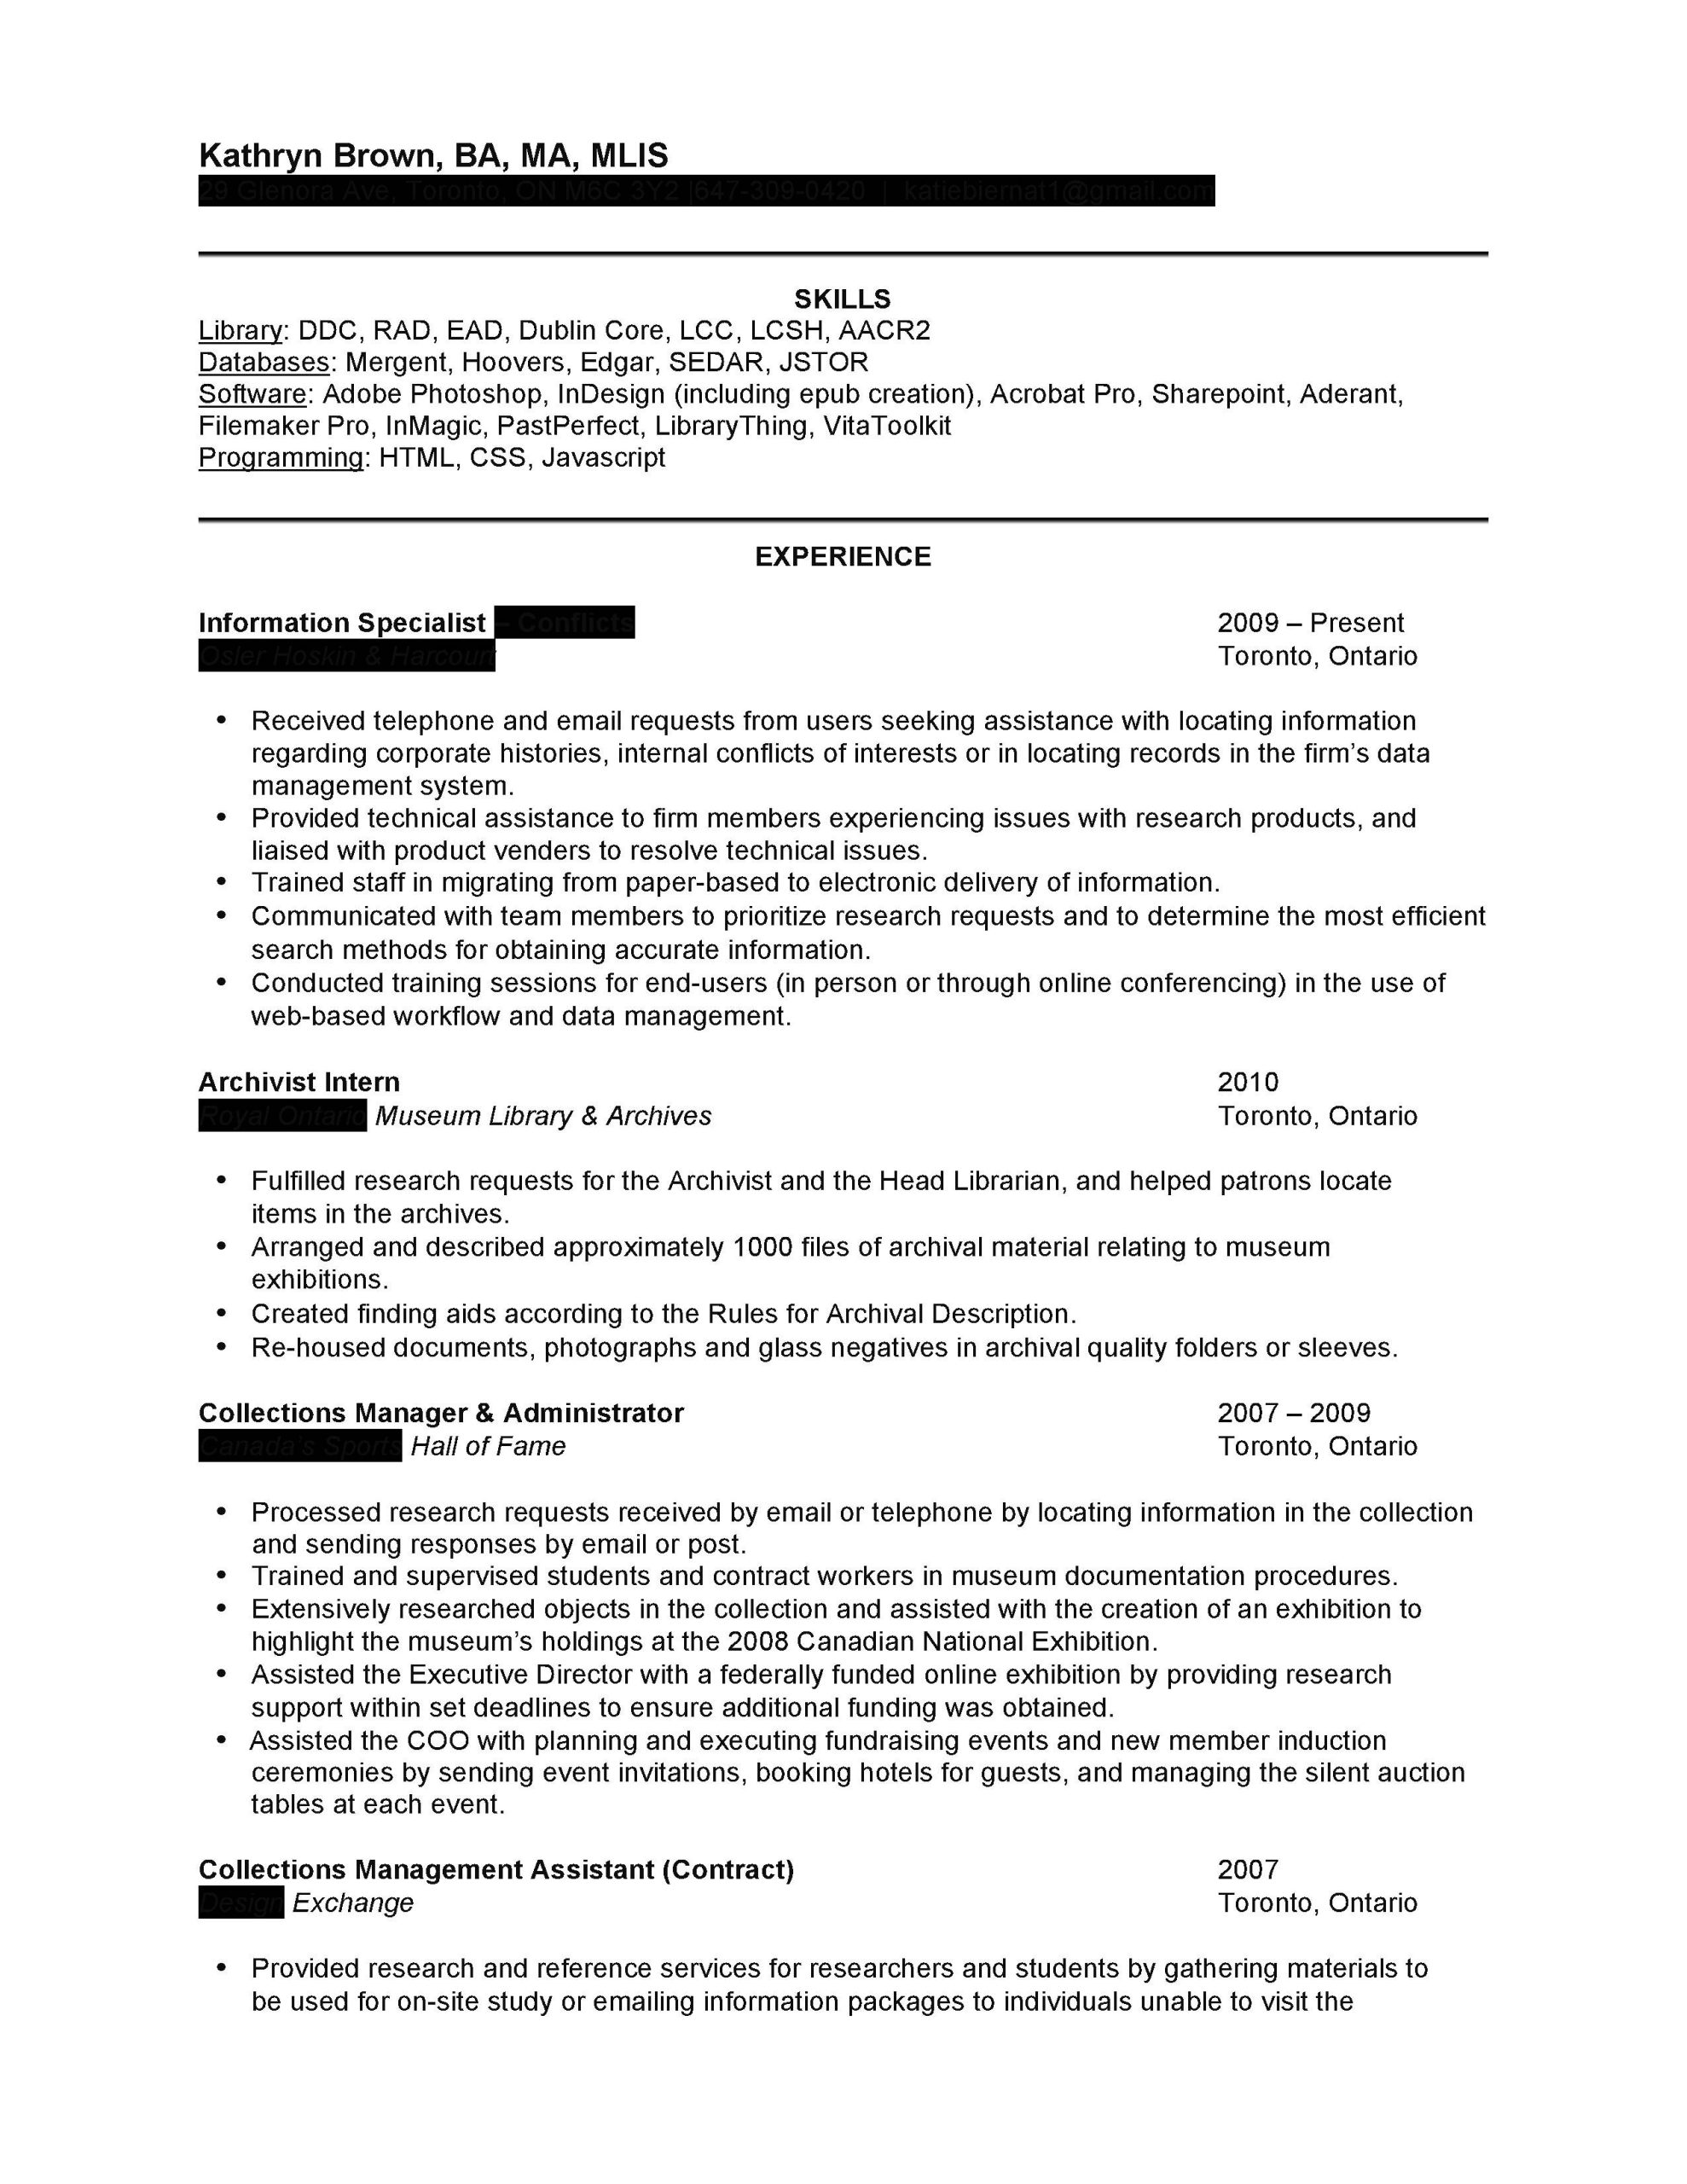 Resume Samples for Entry Level Archivist for Public Review: Job Seeker Kb Hiring Librarians